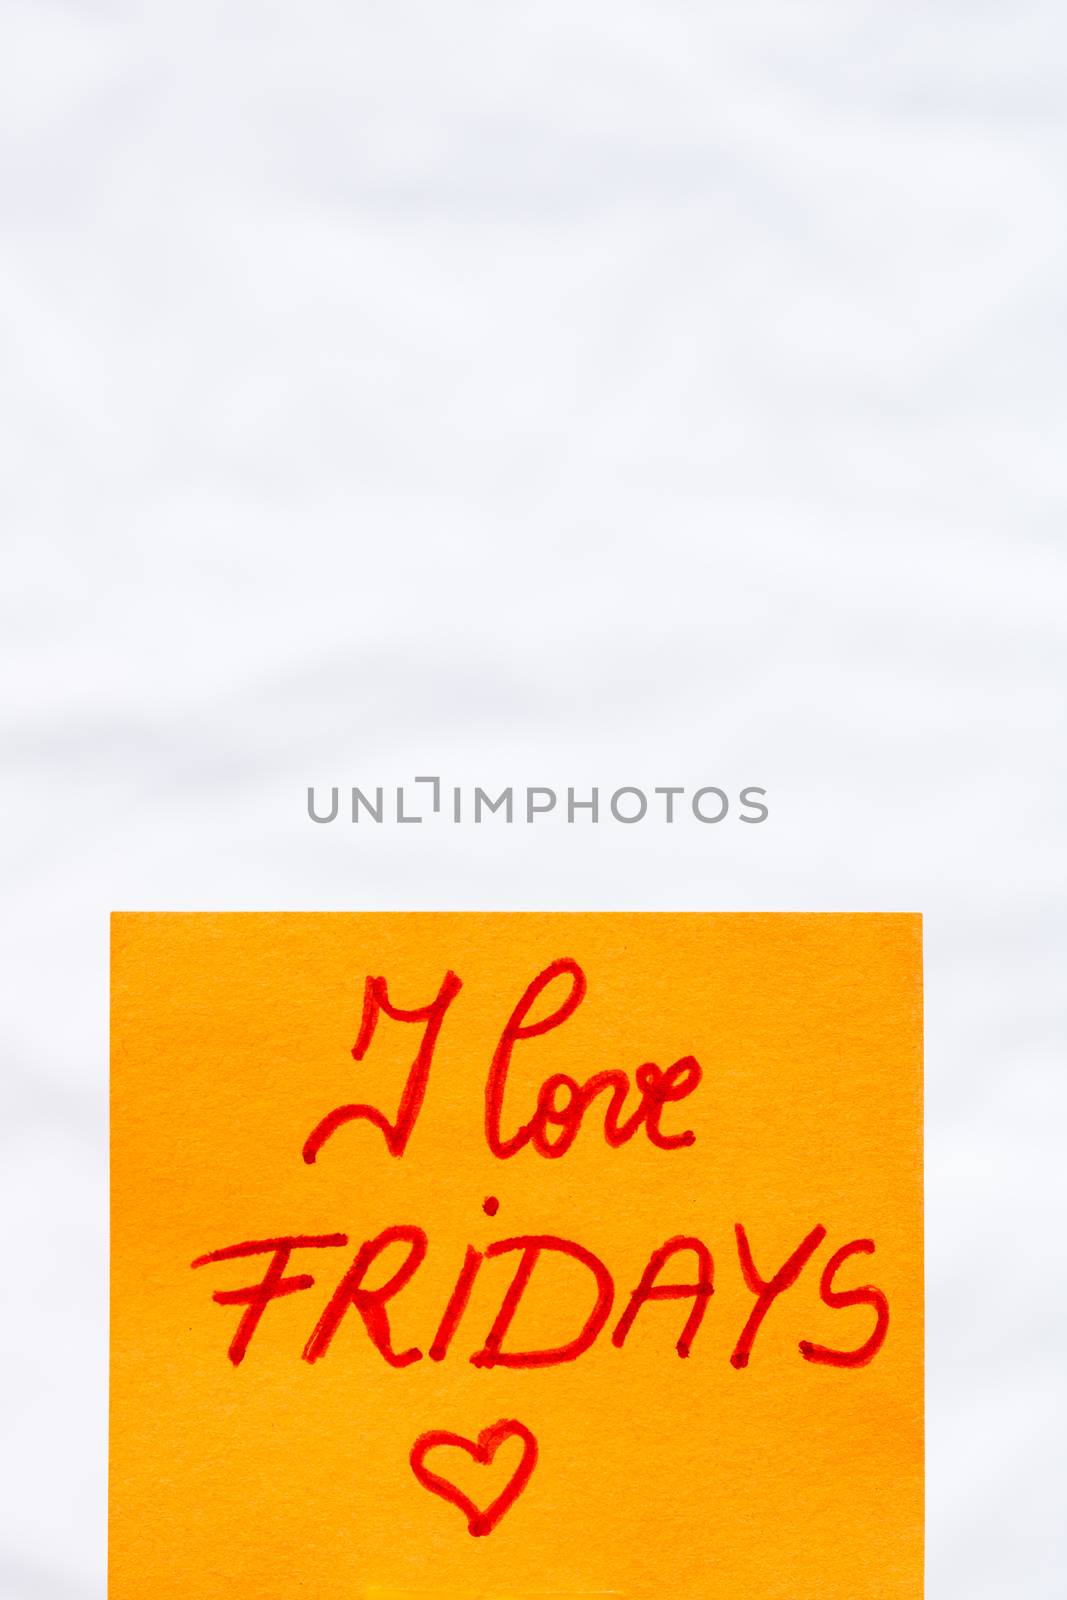 I love fridays handwriting text close up isolated on orange paper with copy space.